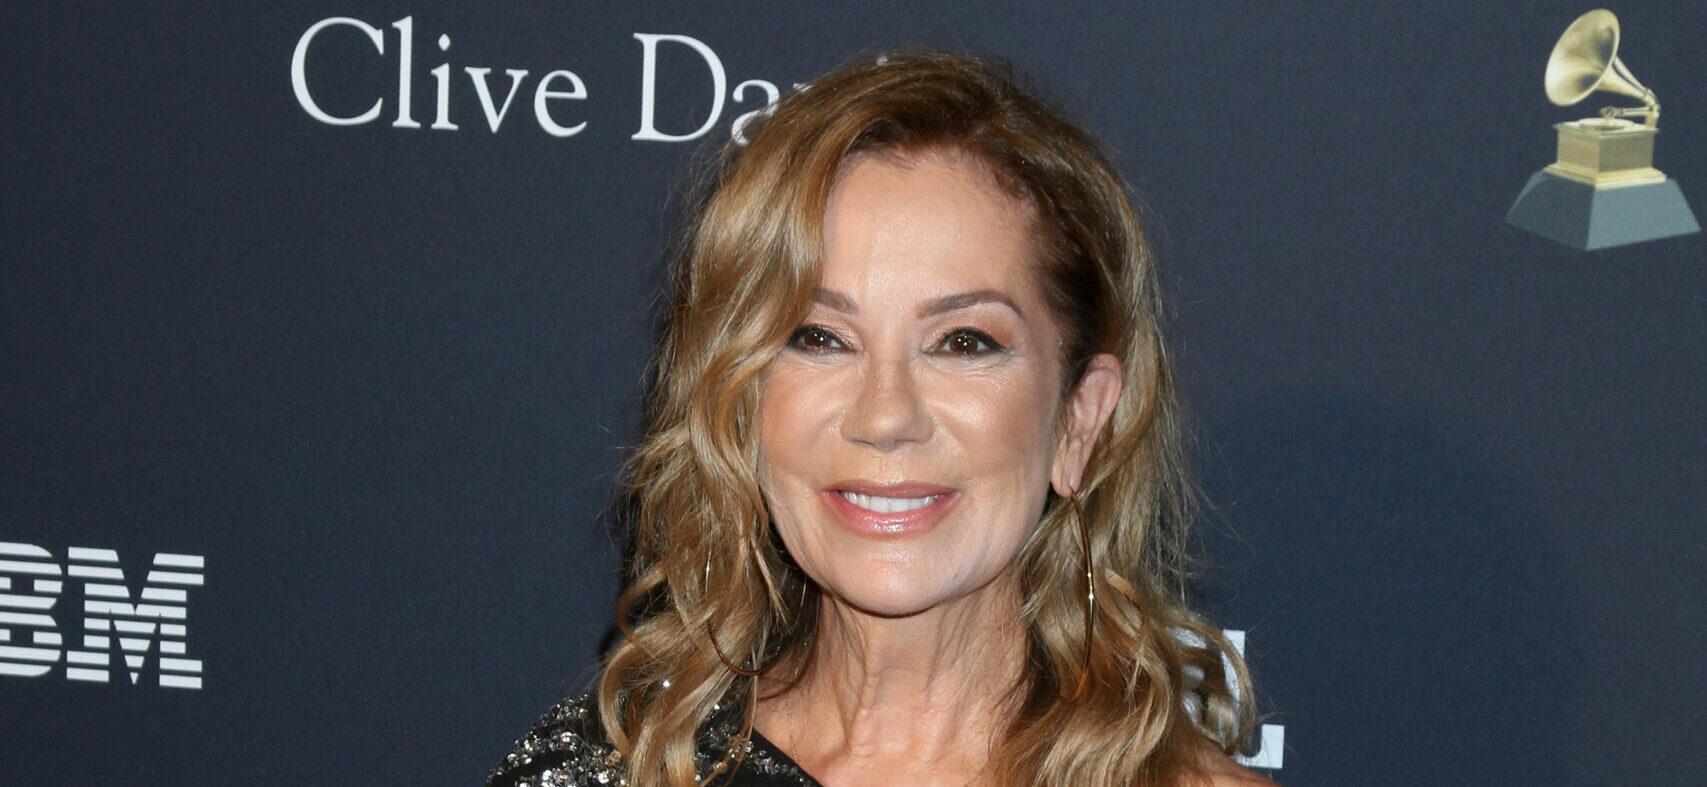 Kathie Lee Gifford Celebrates Becoming A Grandmother Of Two!